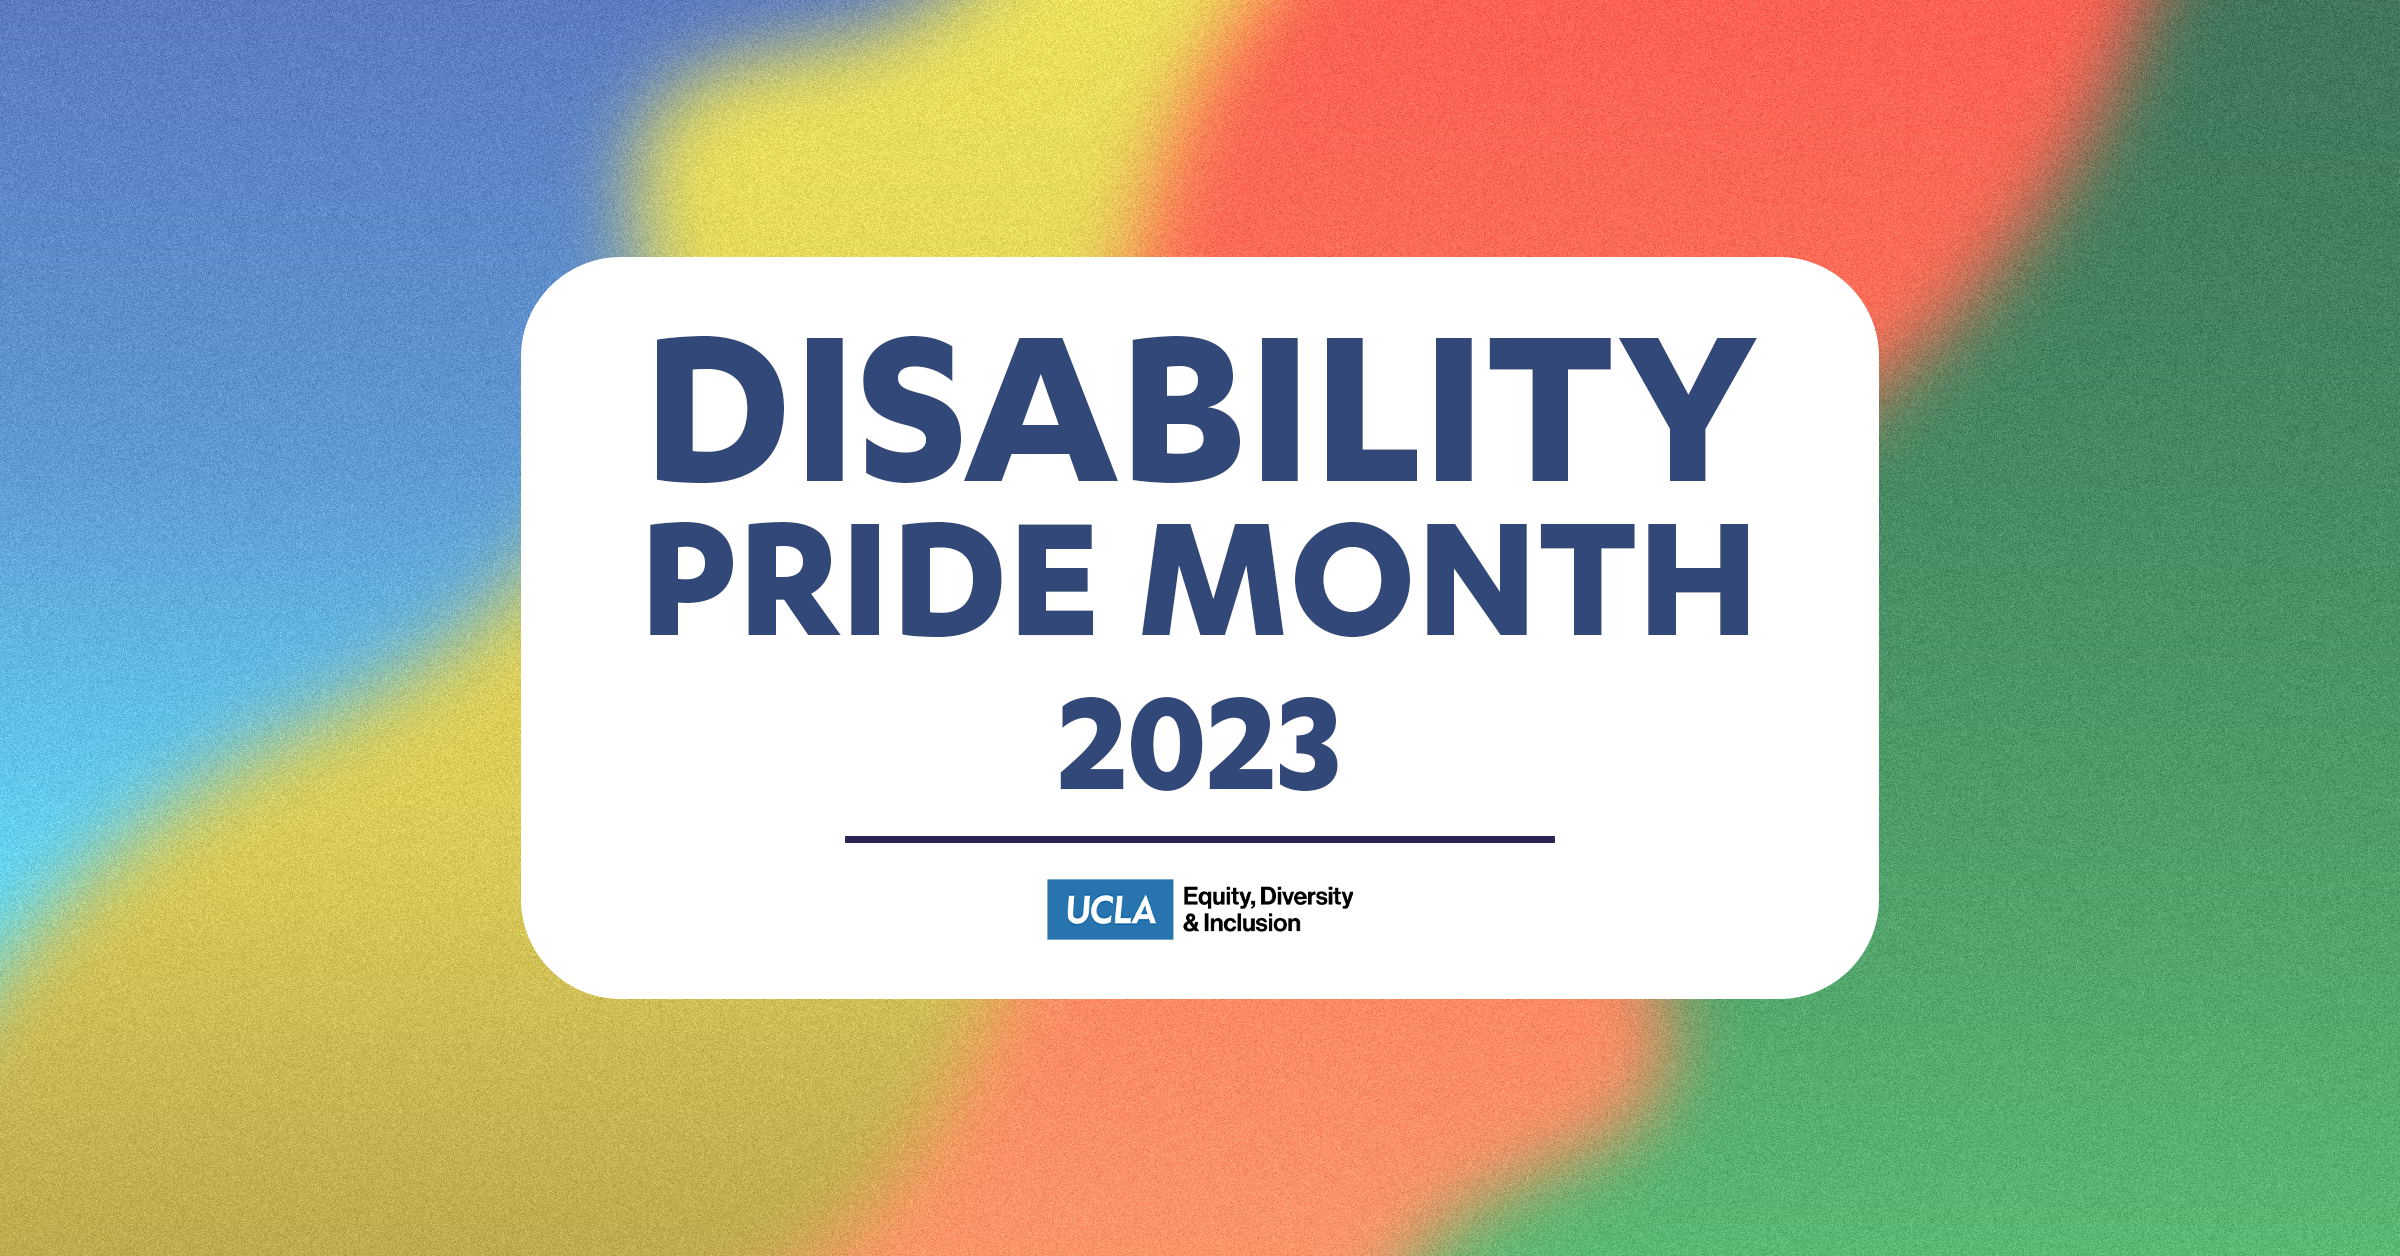 graphic celebrating disability pride month july 2023 with color-gradient background